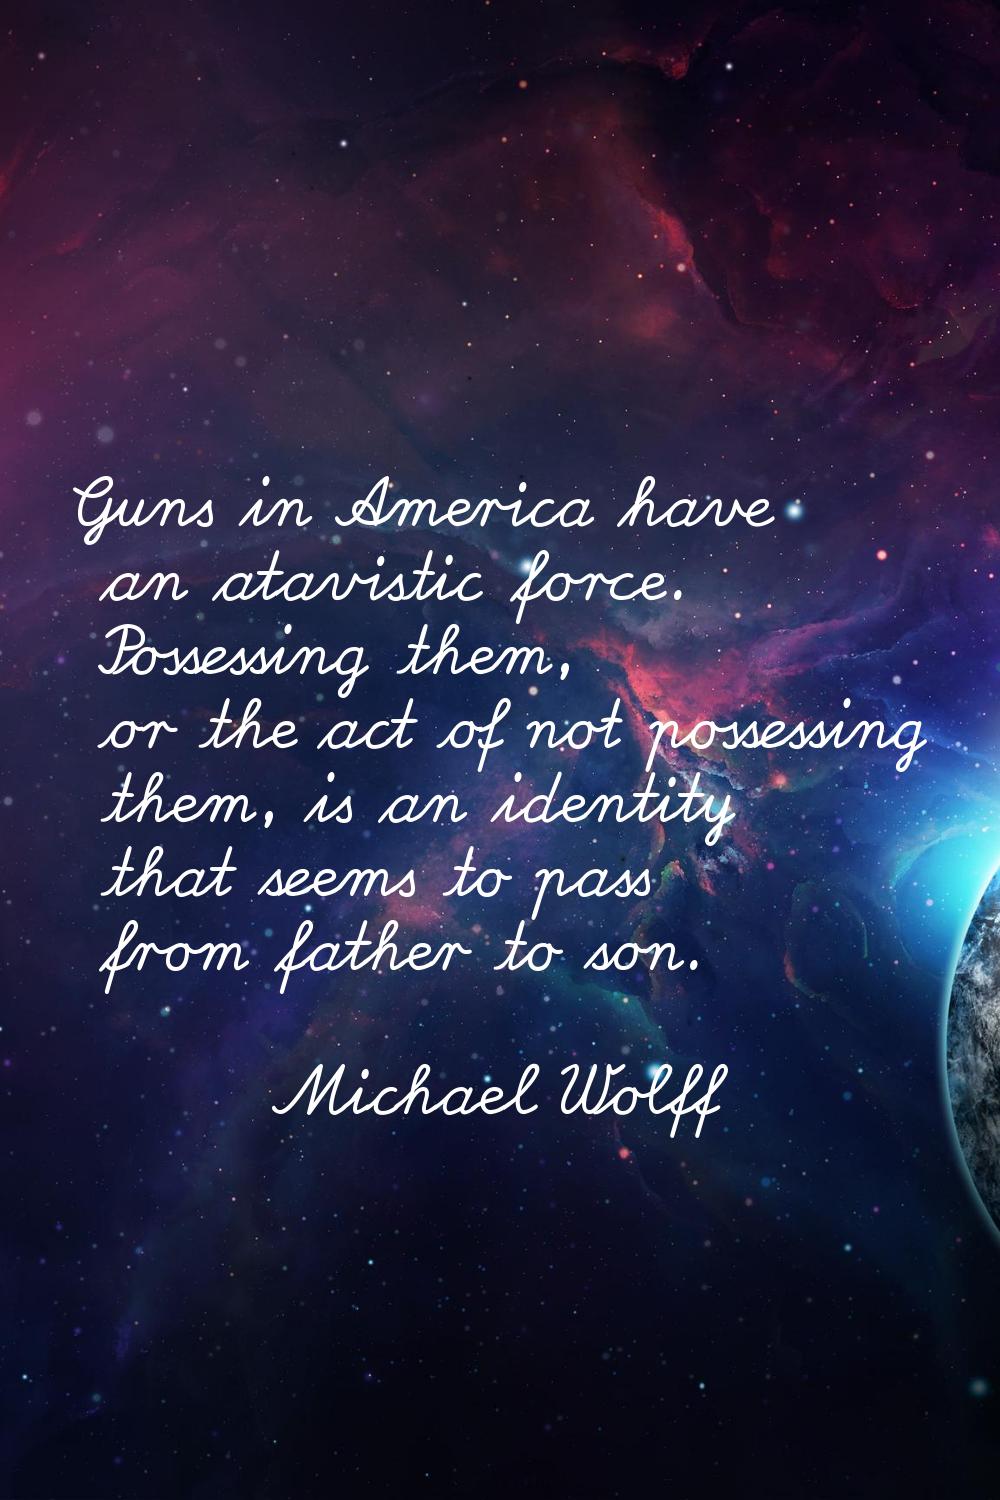 Guns in America have an atavistic force. Possessing them, or the act of not possessing them, is an 